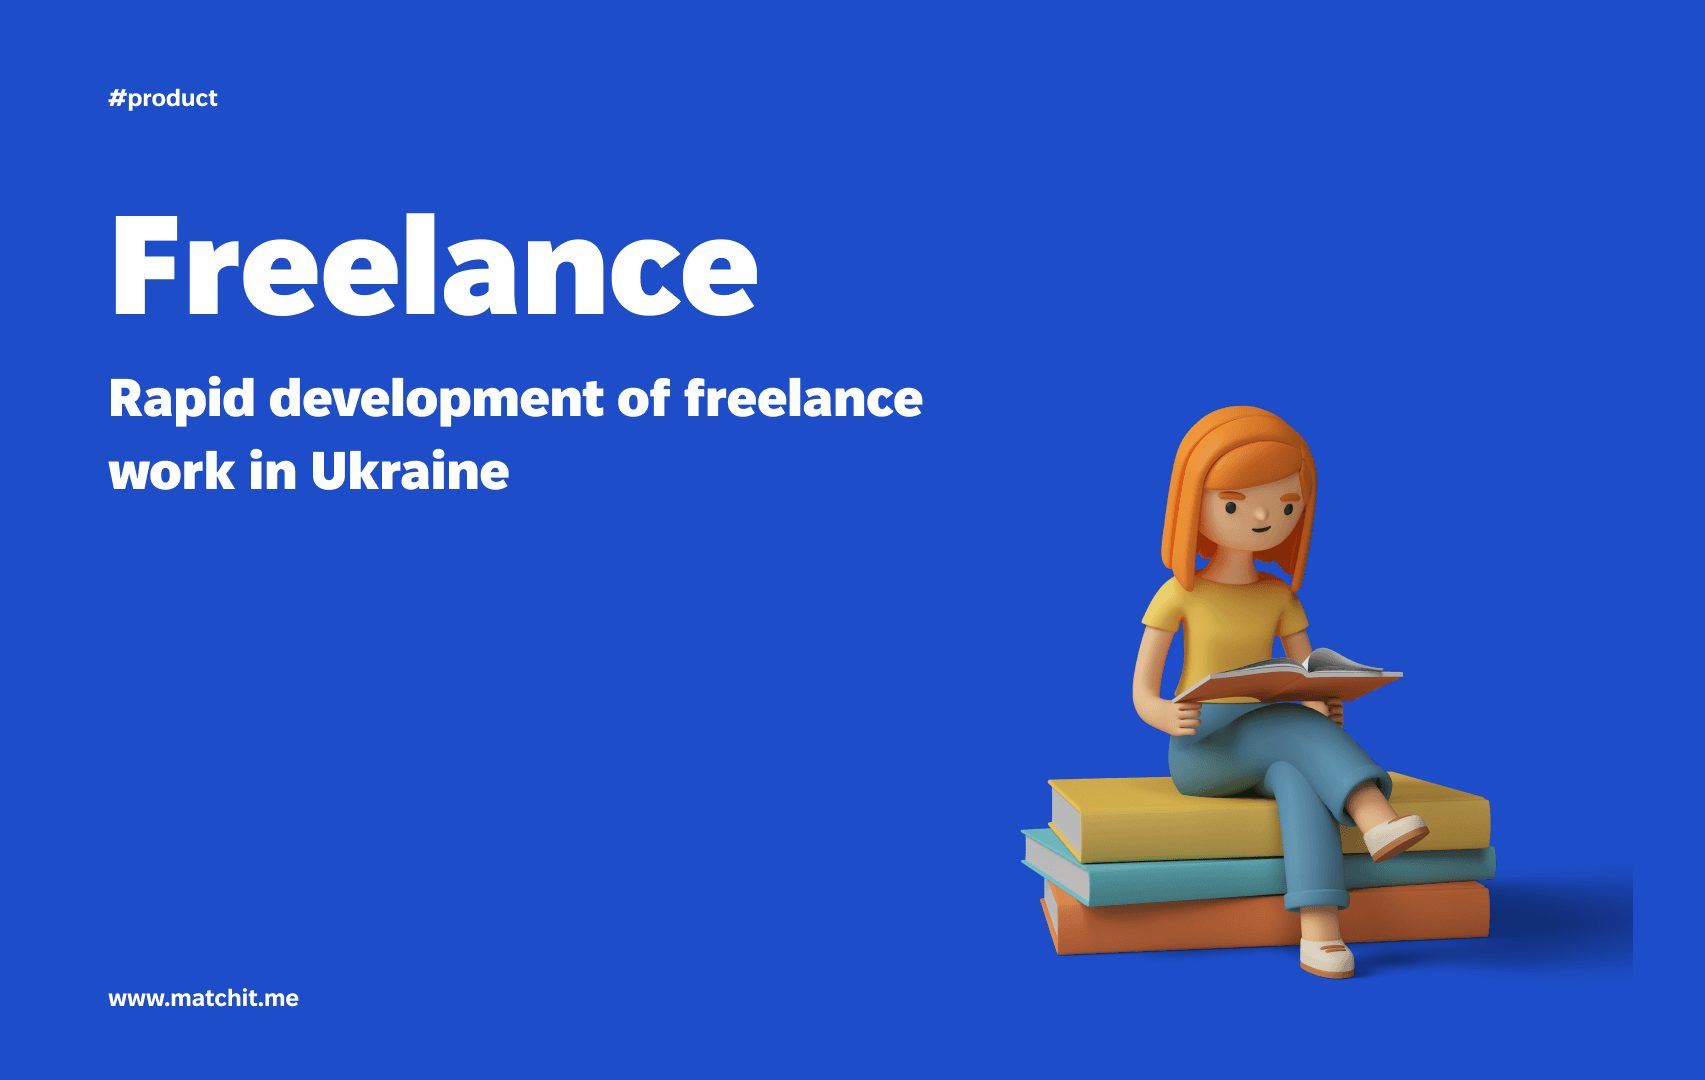 Ukrainian freelancers are developing quickly!